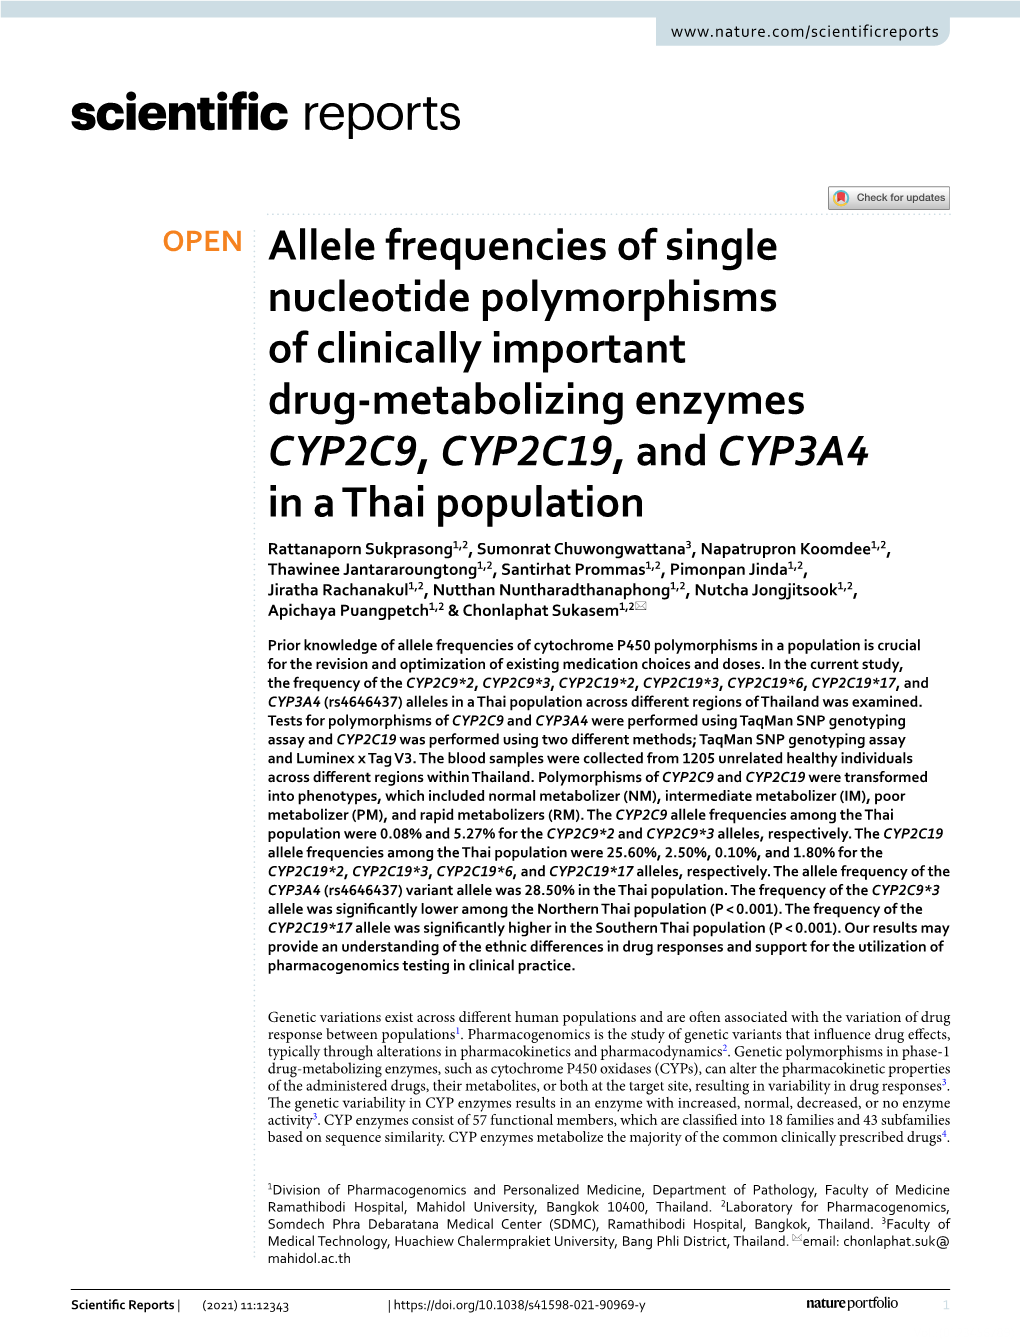 Allele Frequencies of Single Nucleotide Polymorphisms of Clinically